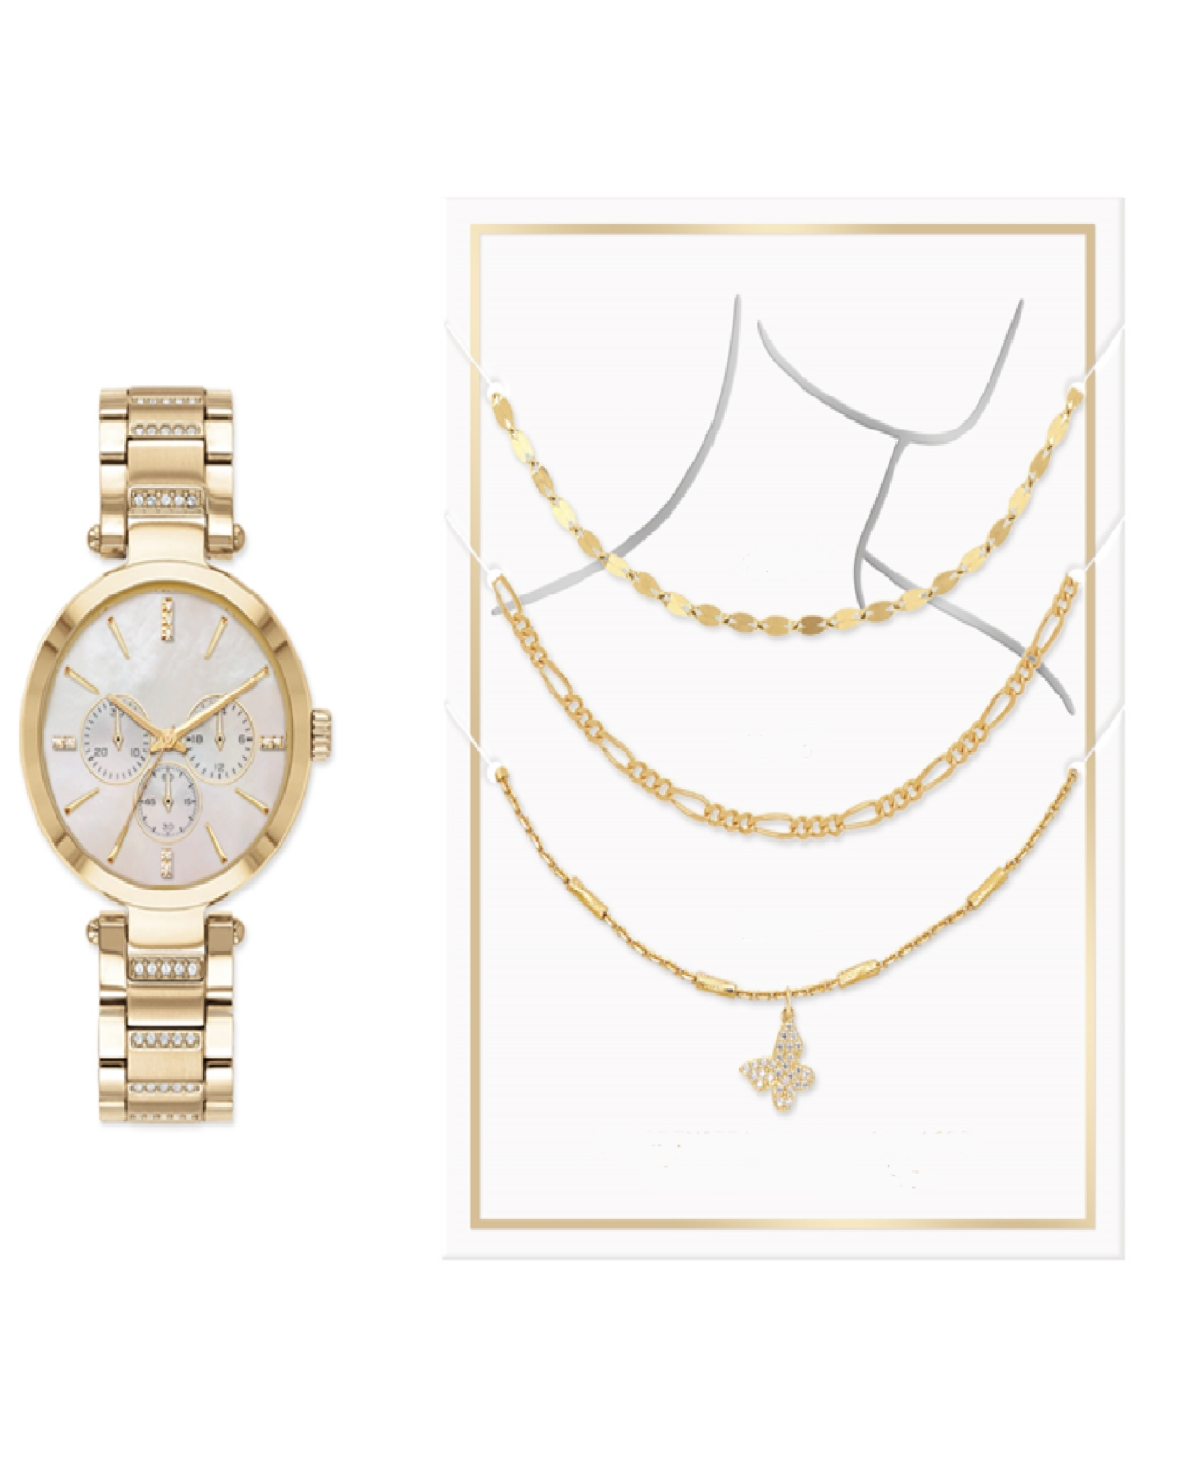 Women's Quartz Gold-Tone Alloy Watch 34mm Gift Set - Shiny Gold, White Mother of Pearl